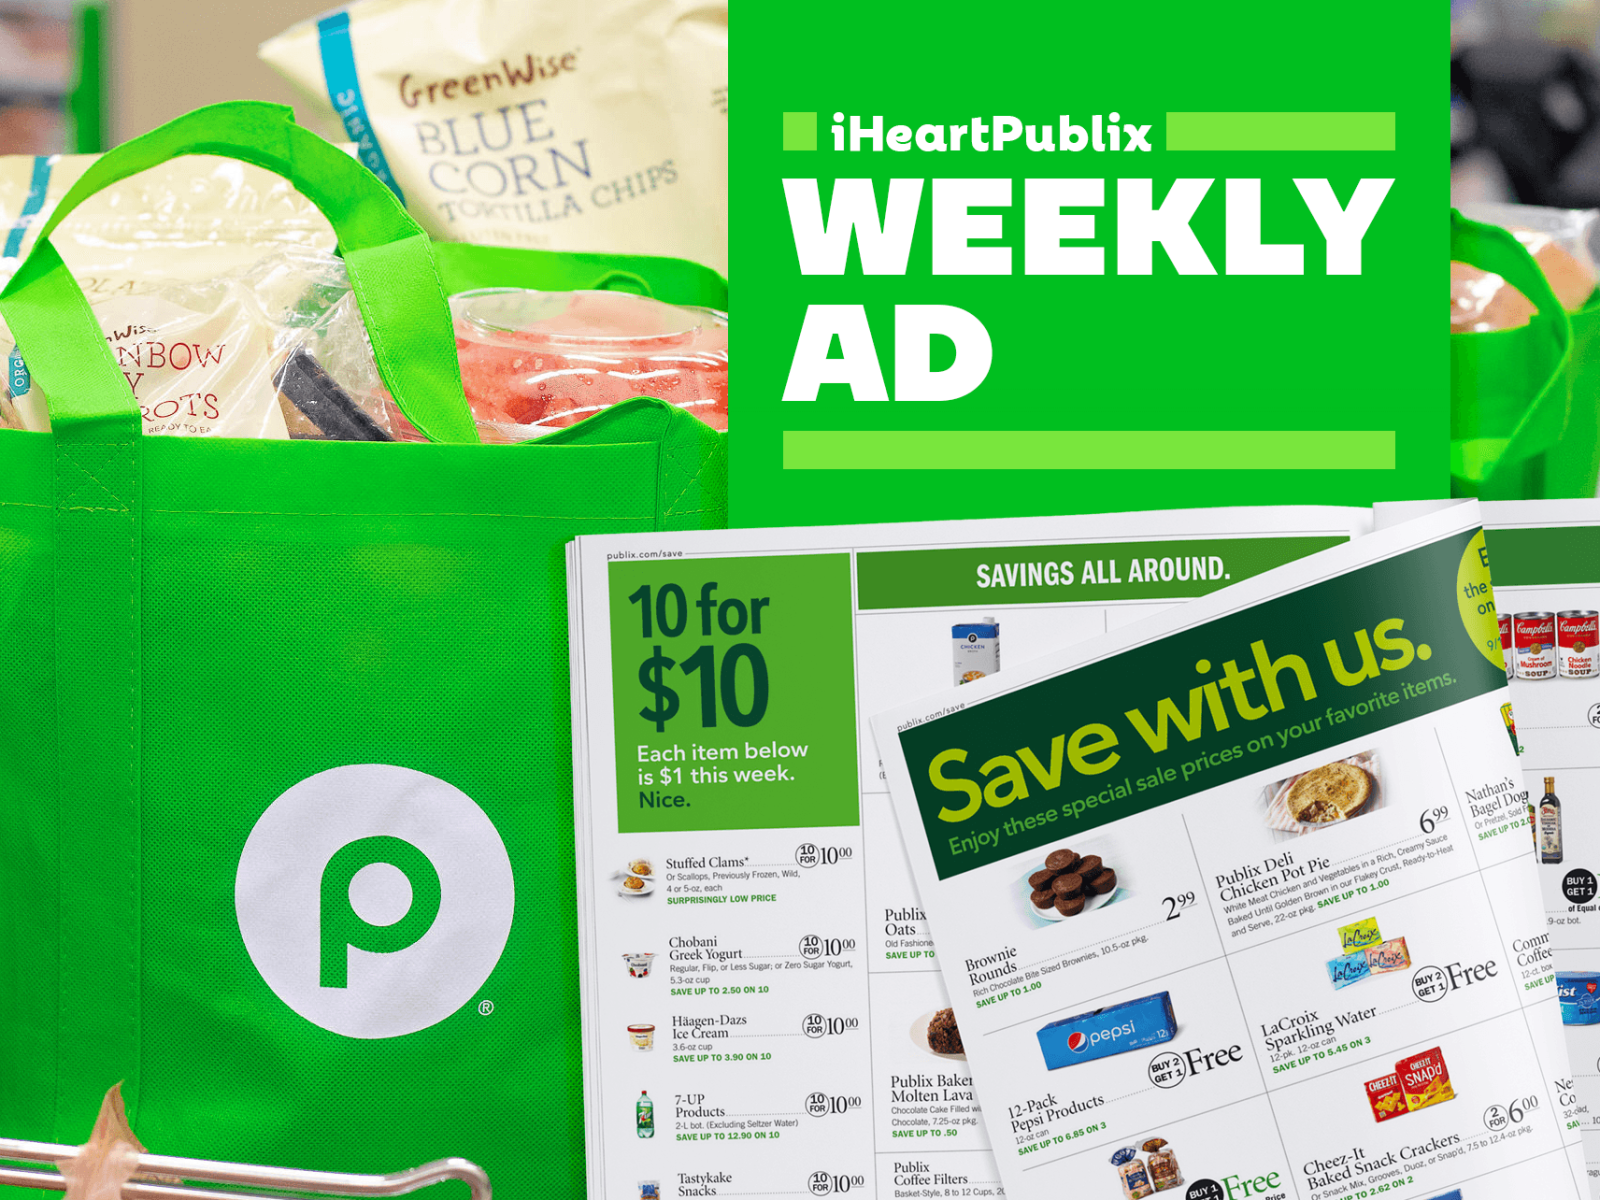 Publix Ad & Coupons Week Of 10/21 to 10/27 (10/20 to 10/26 For Some) on I Heart Publix